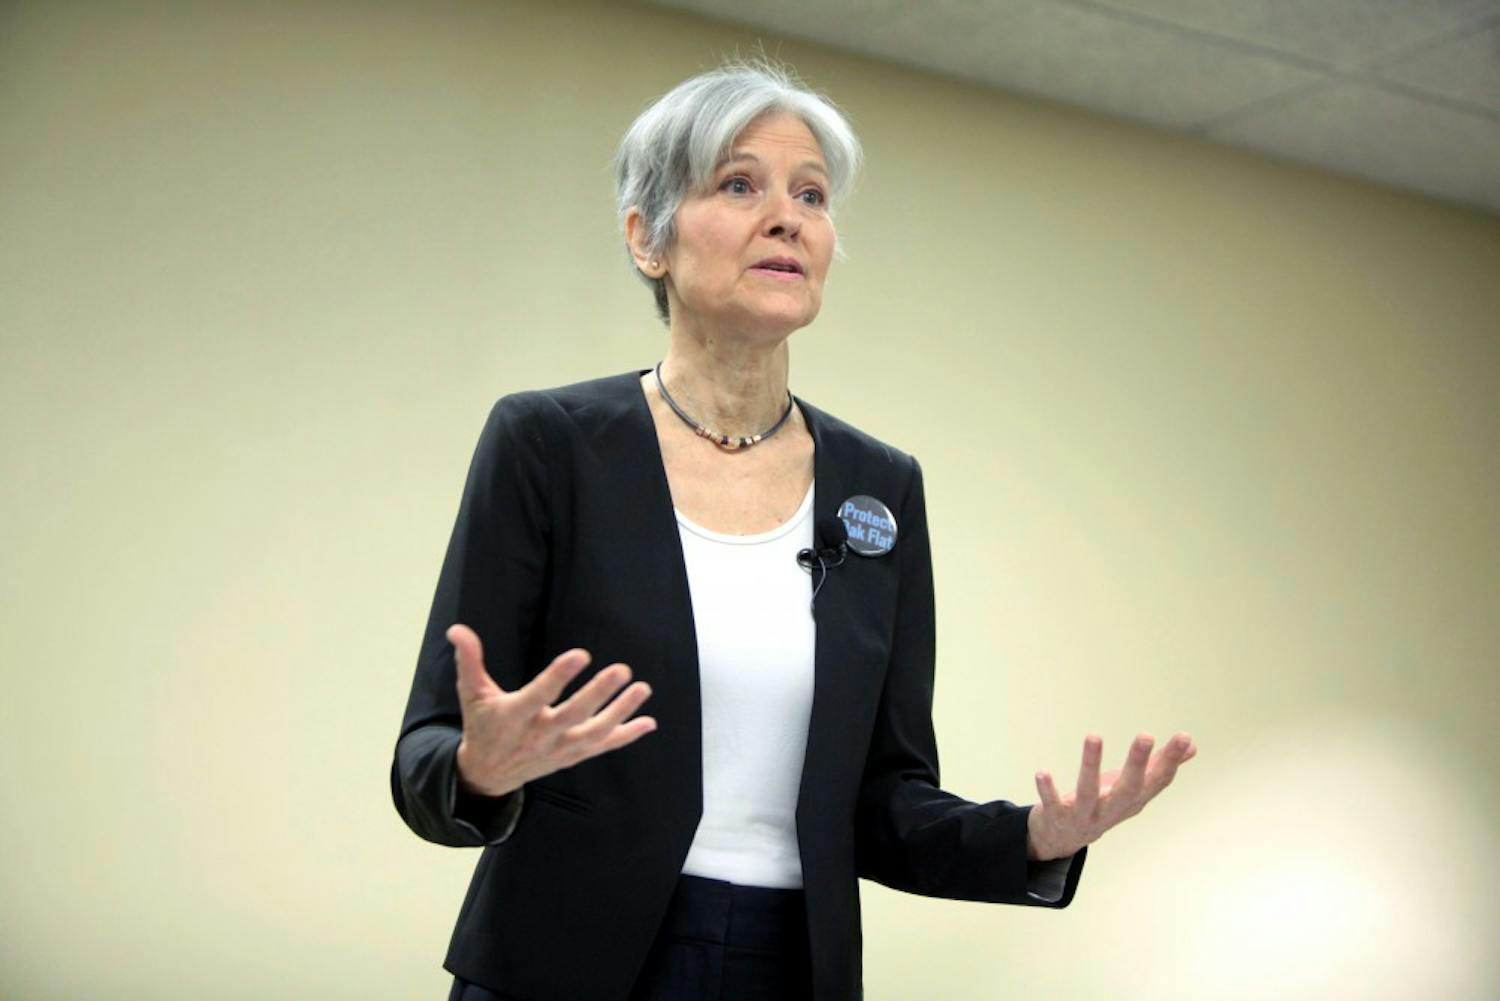 The Athens branch of the&nbsp;International Socialist Organization&nbsp;is supporting&nbsp;Green Party candidate Jill Stein. (Provided via Wikimedia Commons)